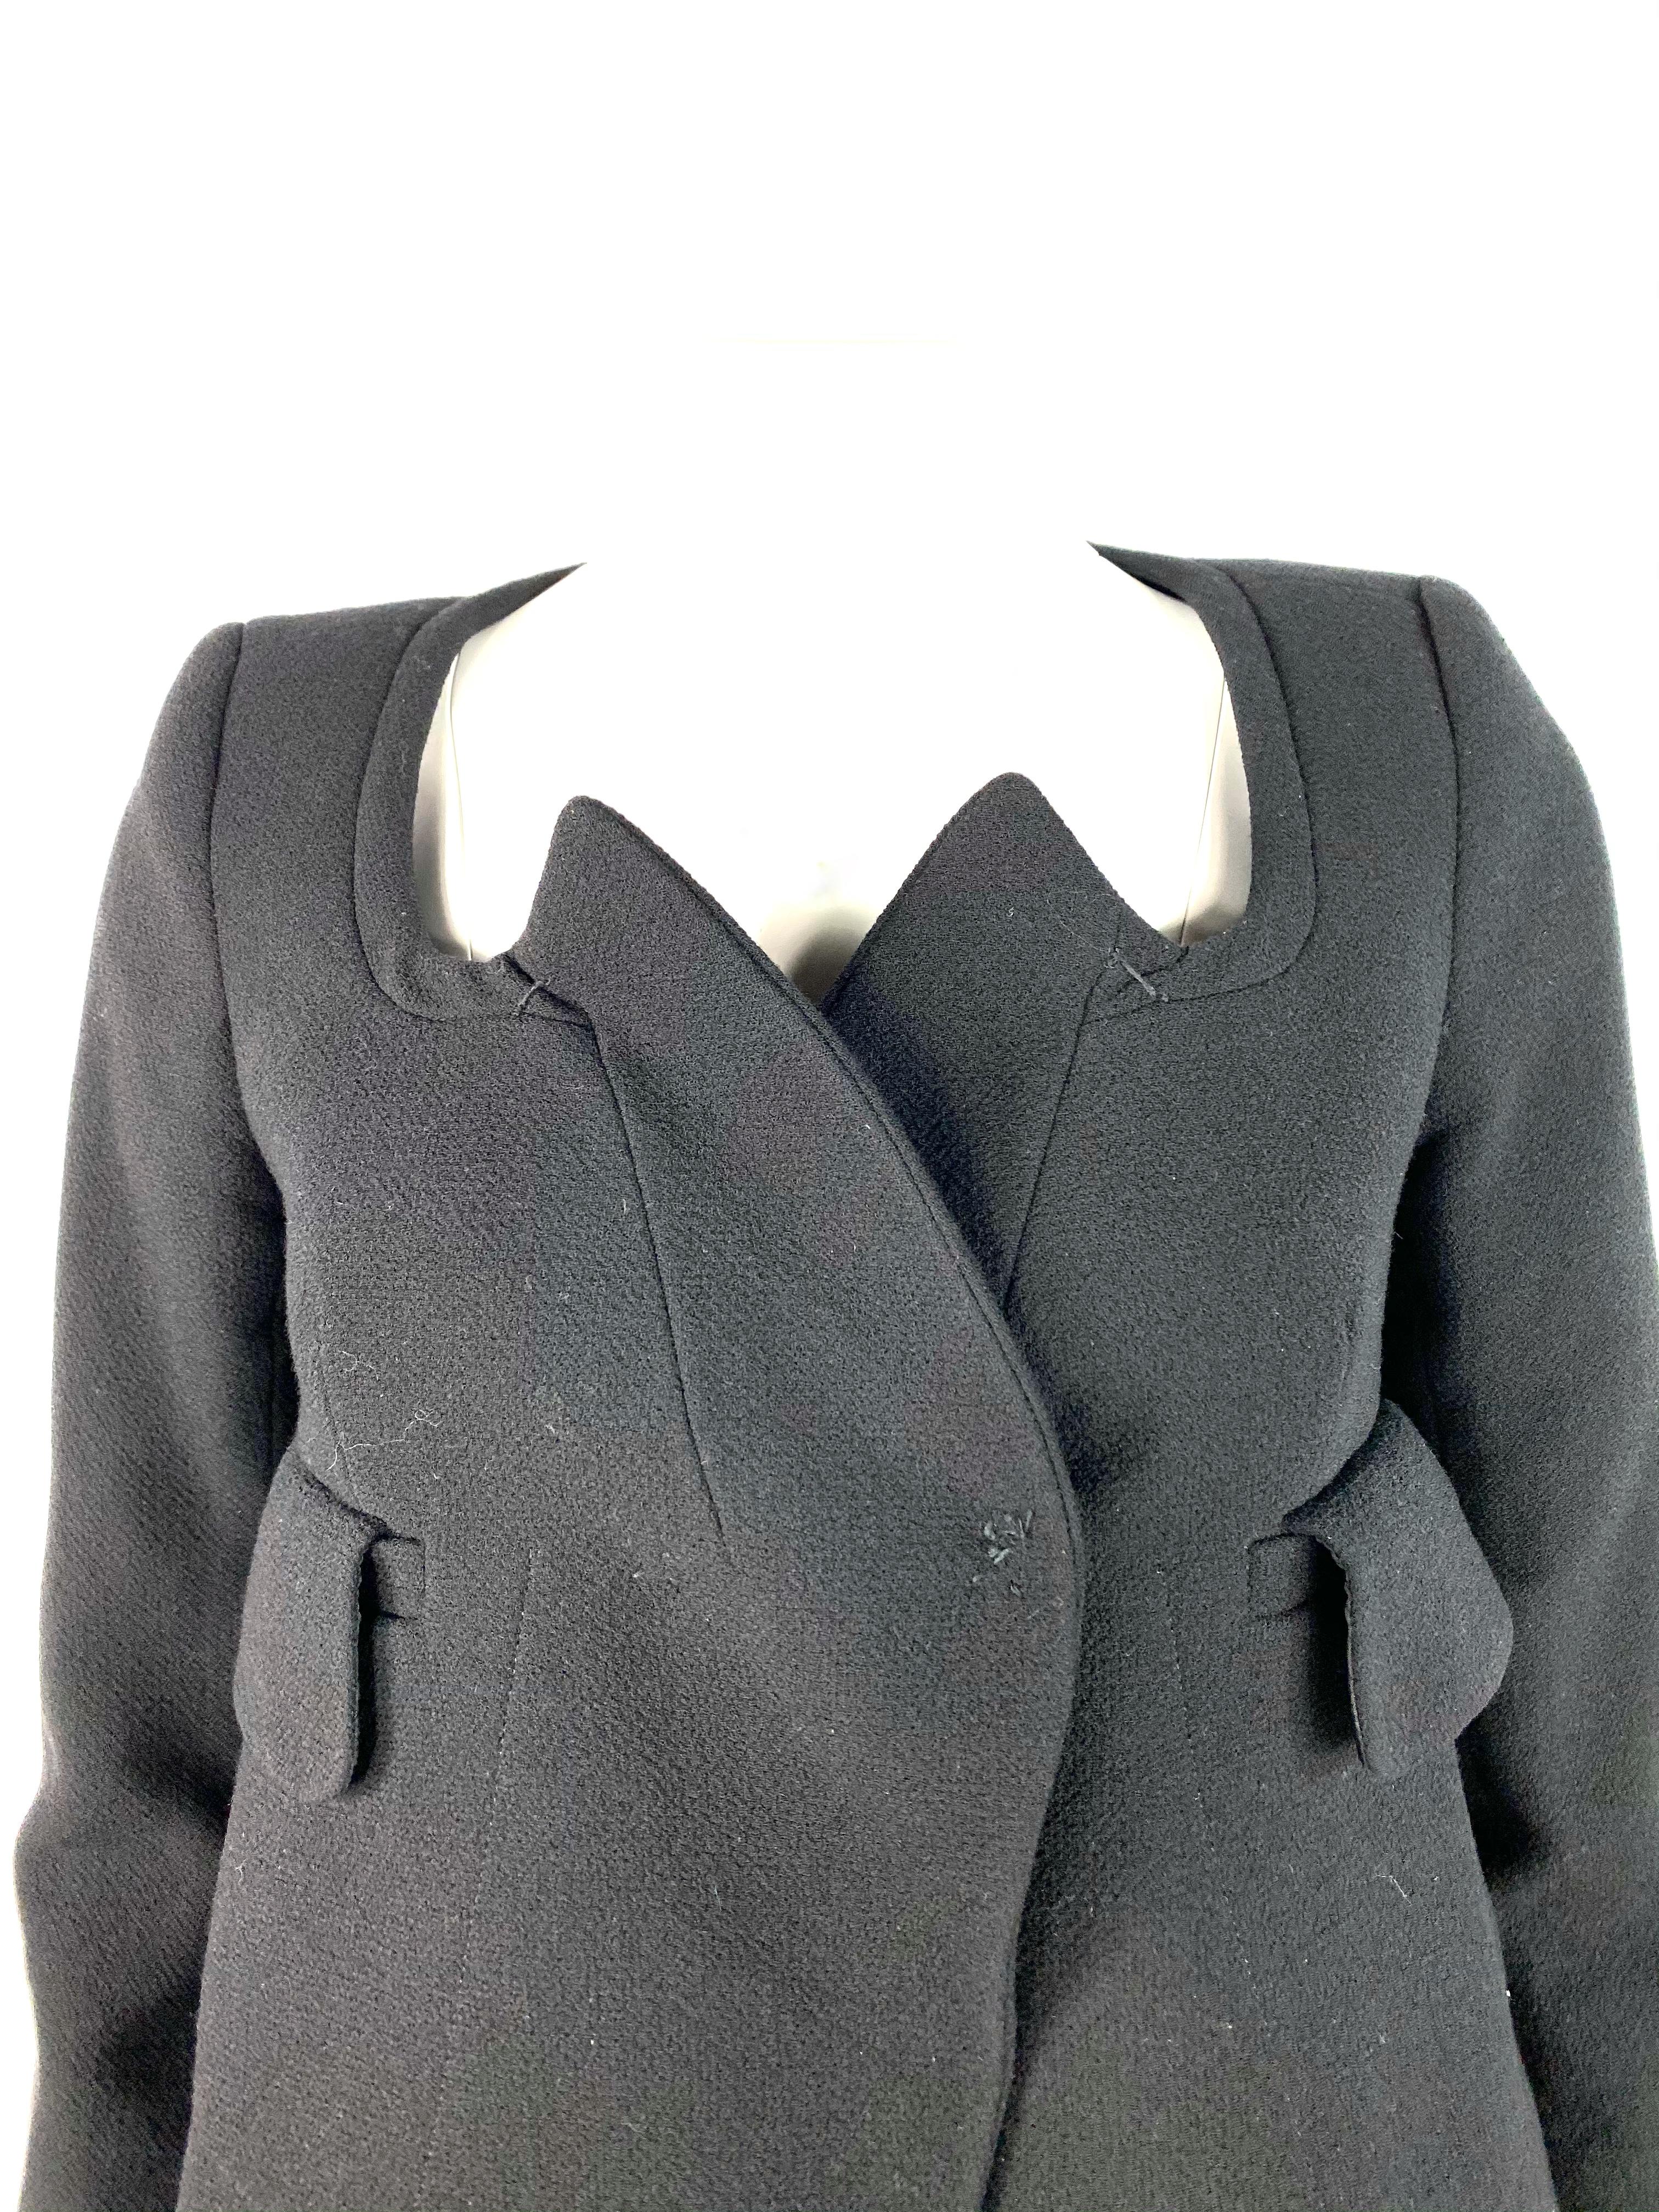 Product details:

Featuring wool blend, blazer jacket with collar, front dual pockets, 3/4 sleeves and front click in button closure. The skirt feature flare style with rear silver tone hardware zip closure and mini length.
Made in Hungary. 